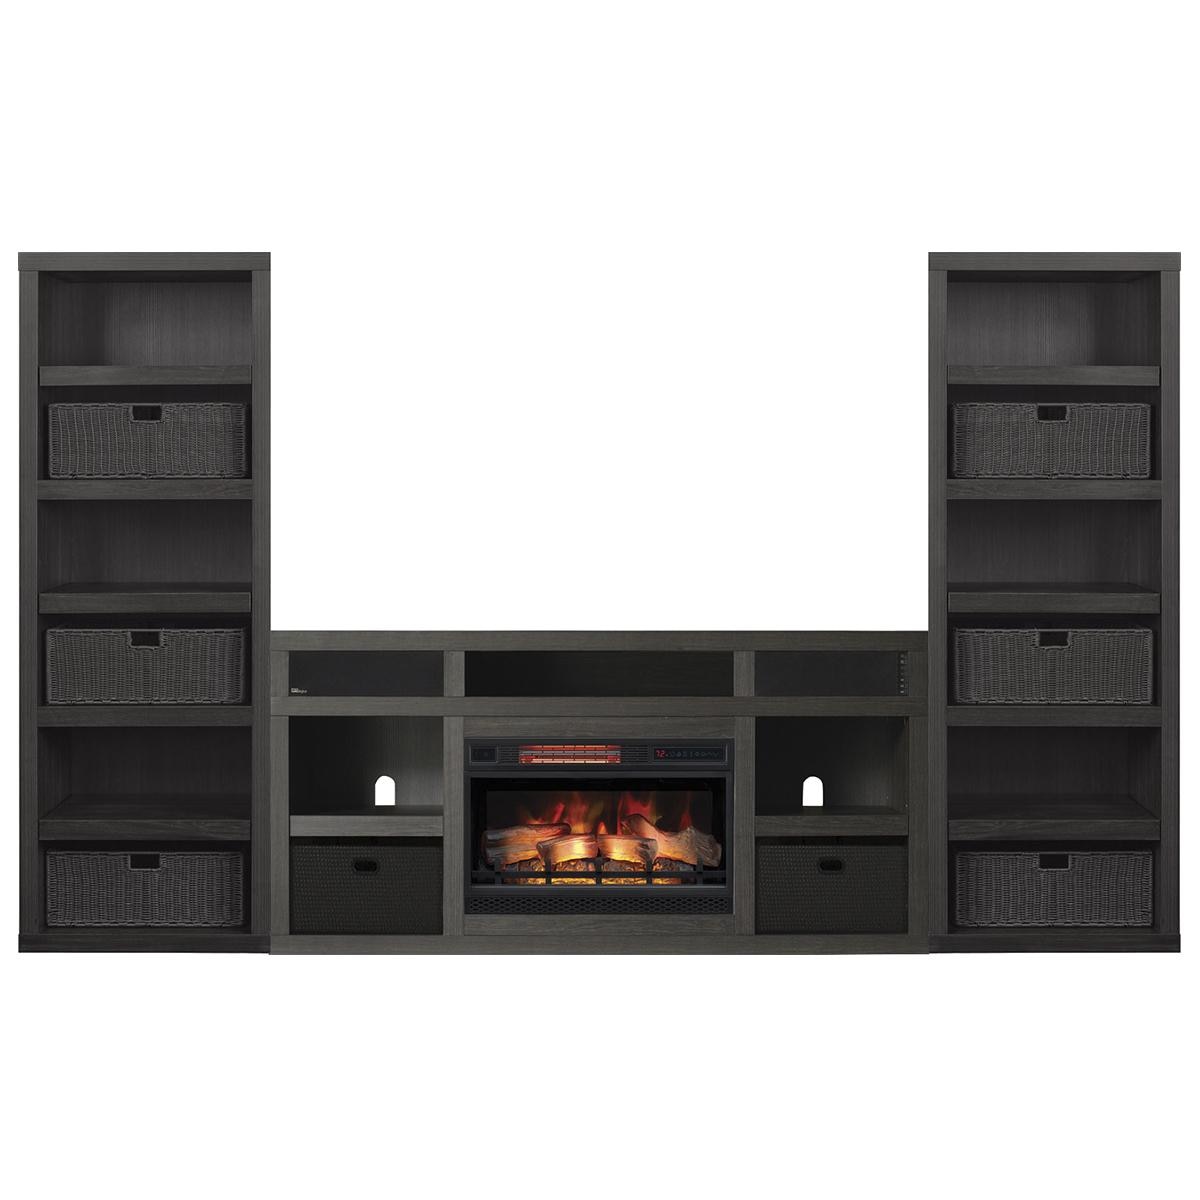 Modern Fireplace tools Awesome Fabio Flames Greatlin 3 Piece Fireplace Entertainment Wall